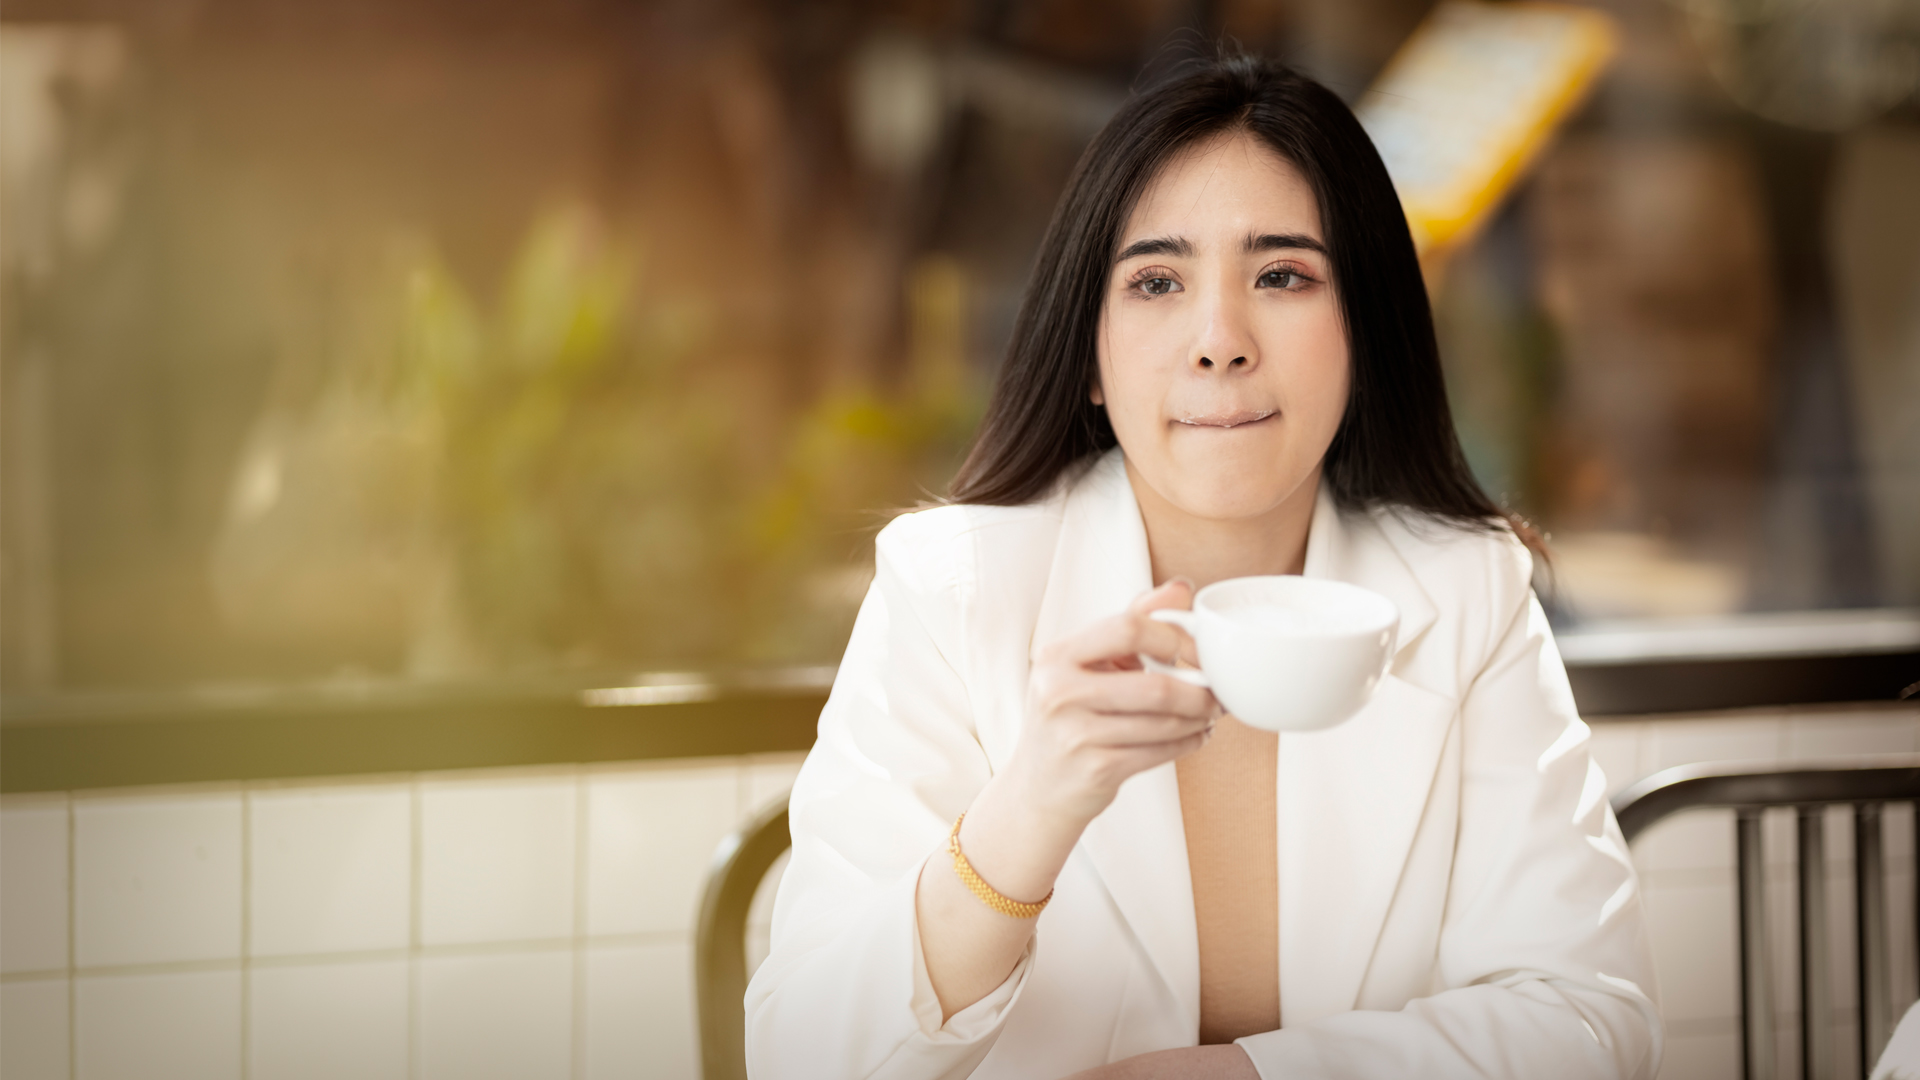 Image of woman pursing her lips as she drinks coffee